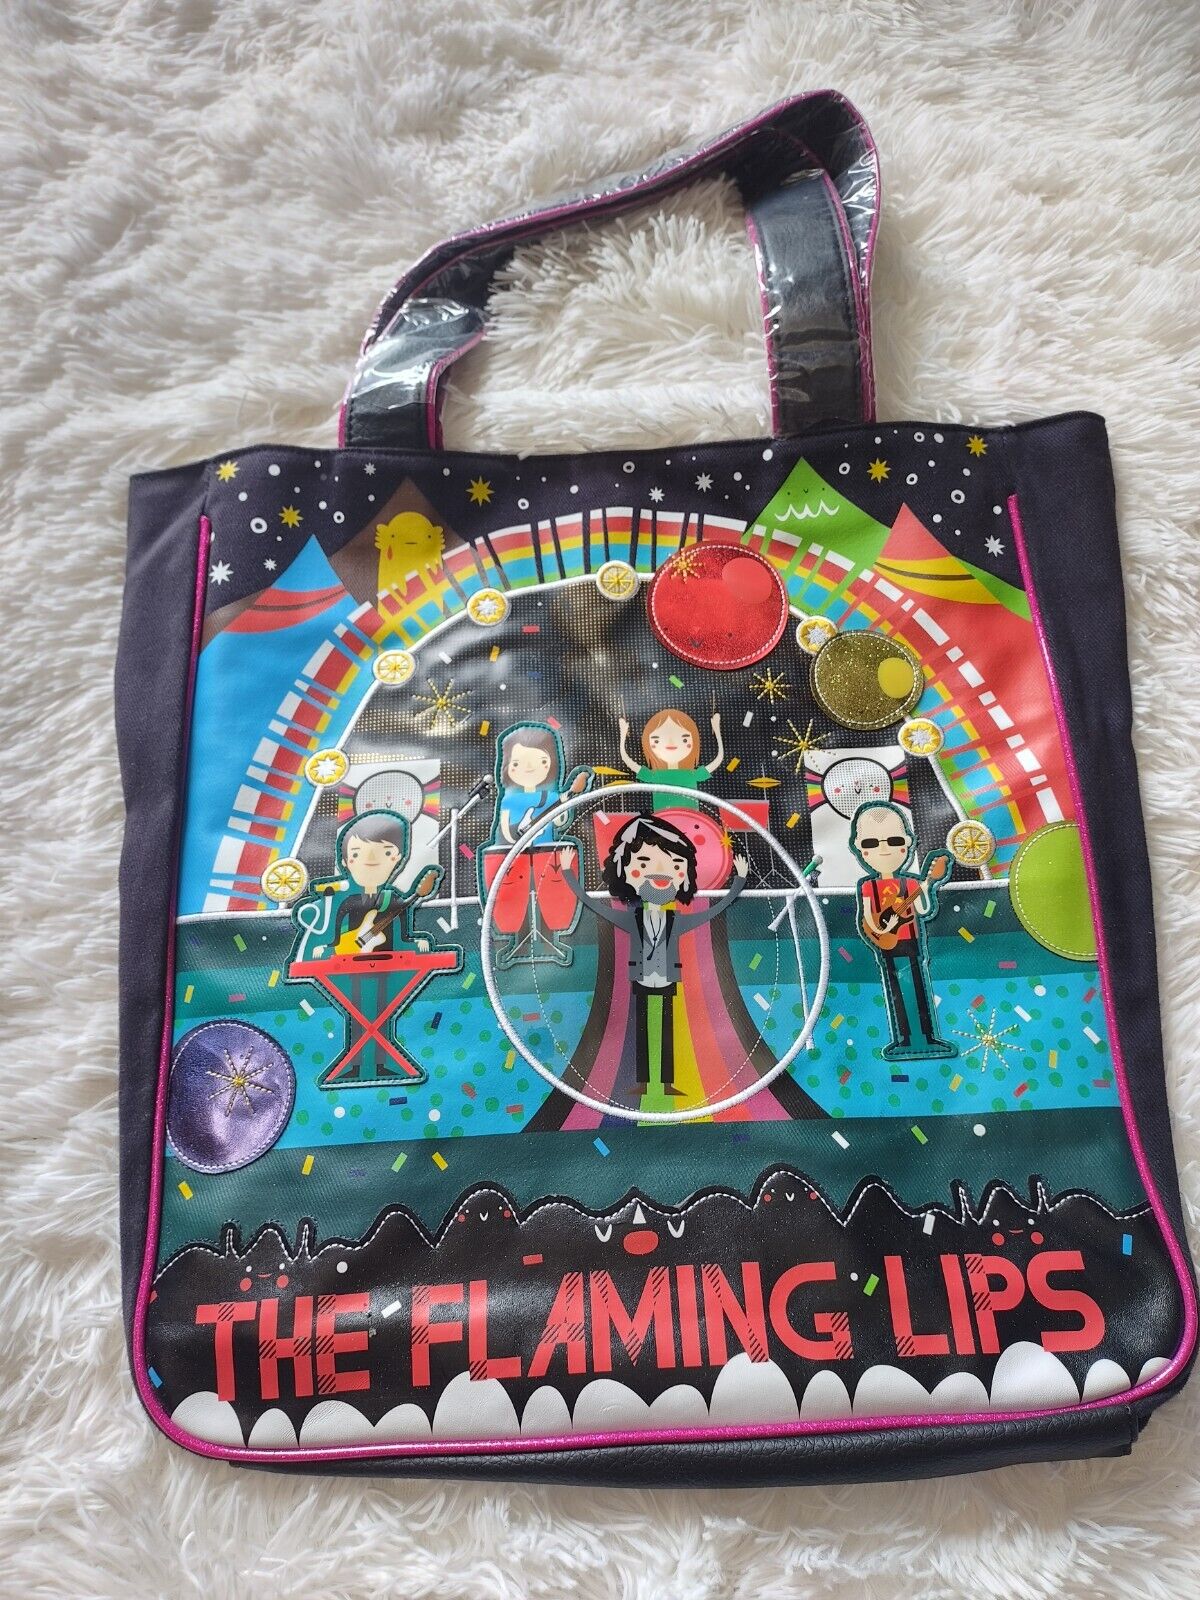 The Flaming Lips - Limited Edition Custom Tote Bag - Designed by Michelle Romo